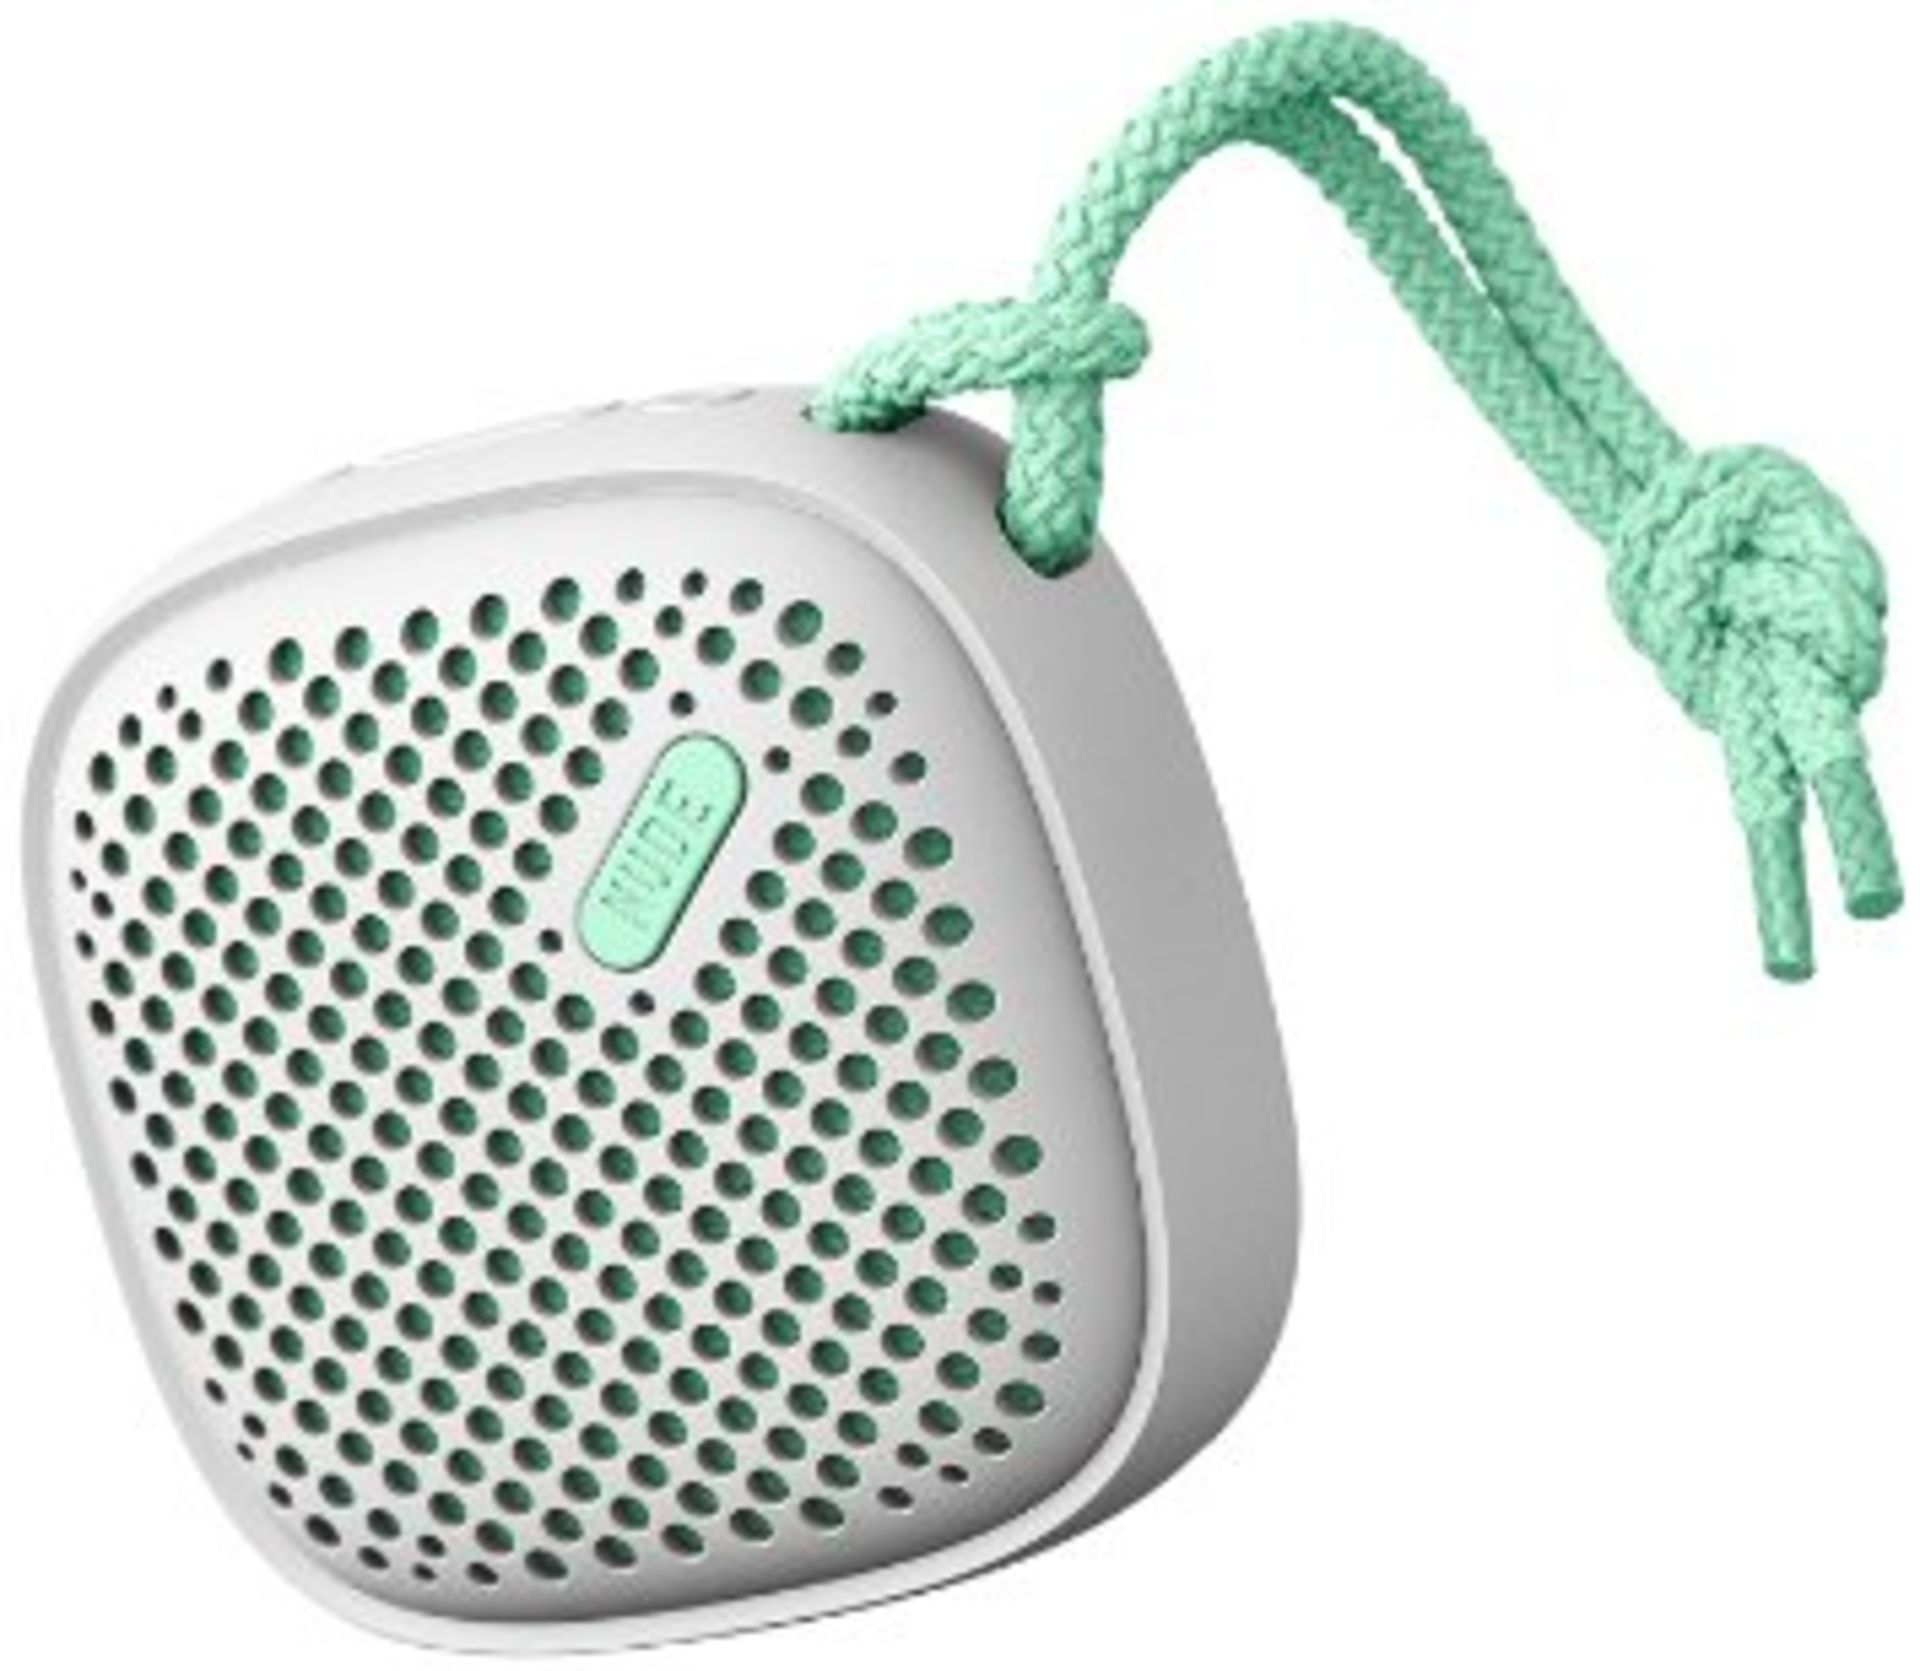 V Brand New Nude Audio Move S Bluetooth Speaker Grey/Green With 8hr Battery Life And AUX Socket